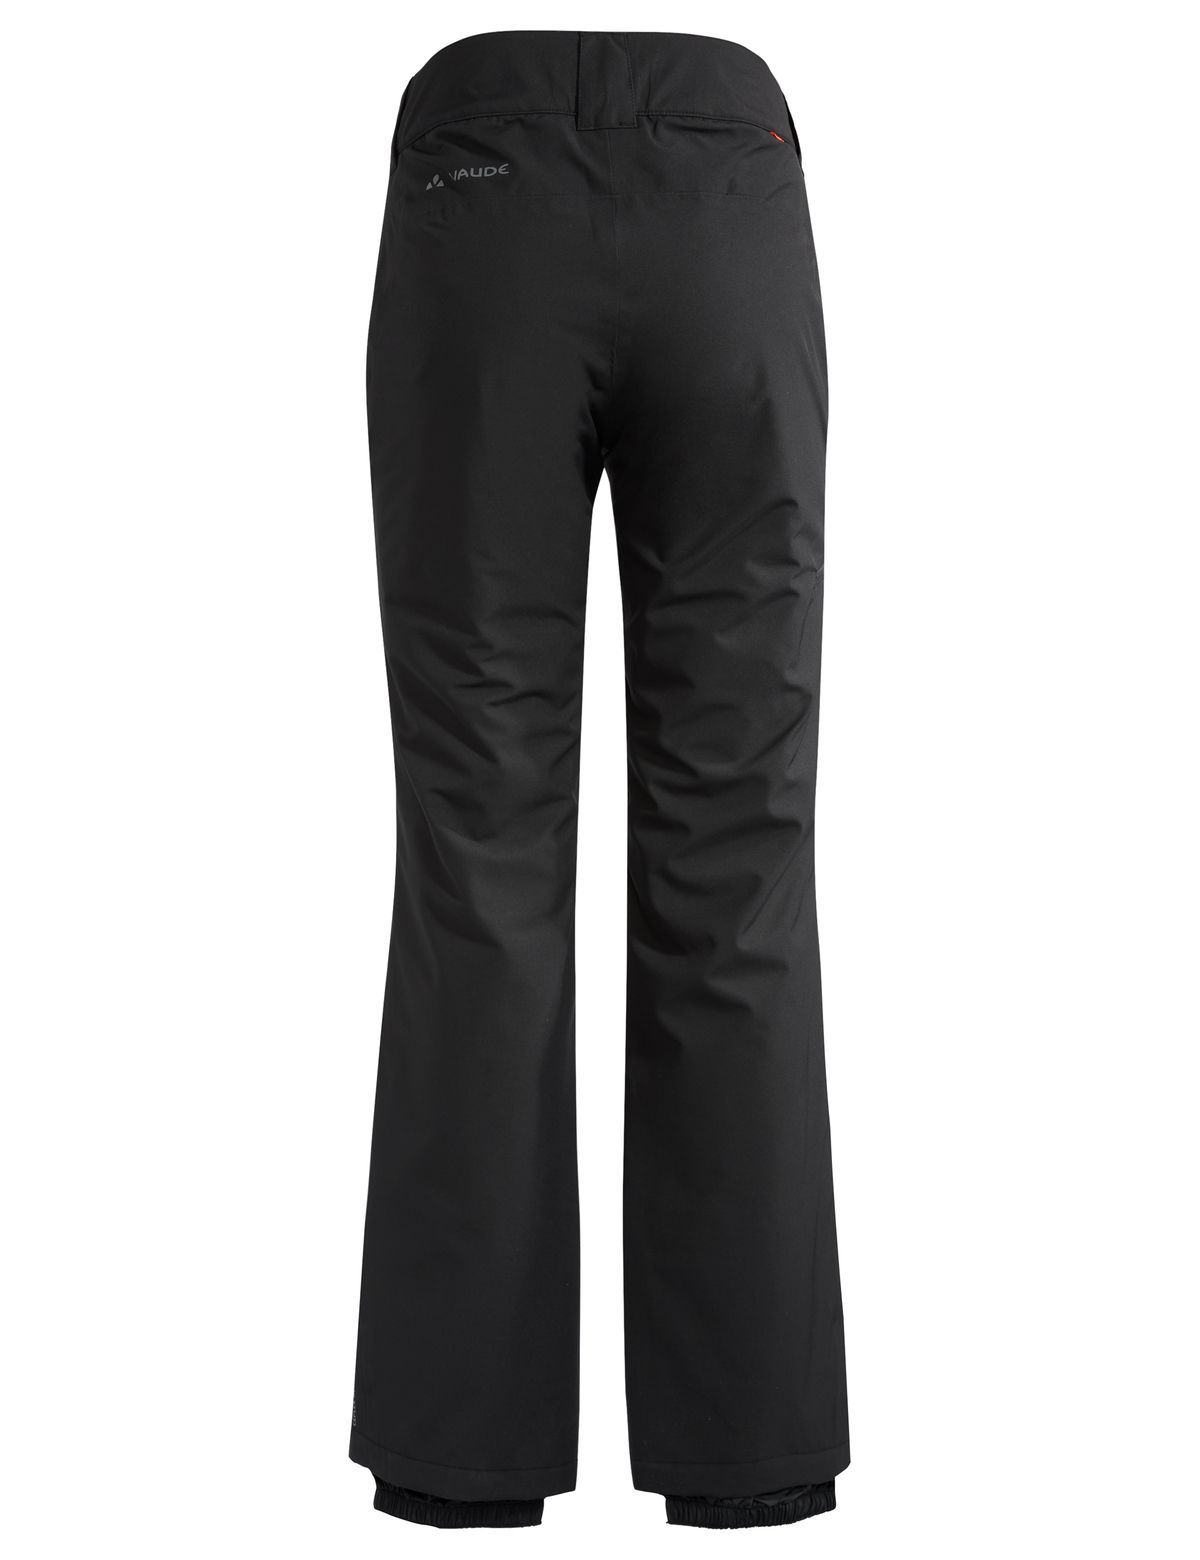 Vaude Women's Strathcona Padded Trousers - Recycled Polyester